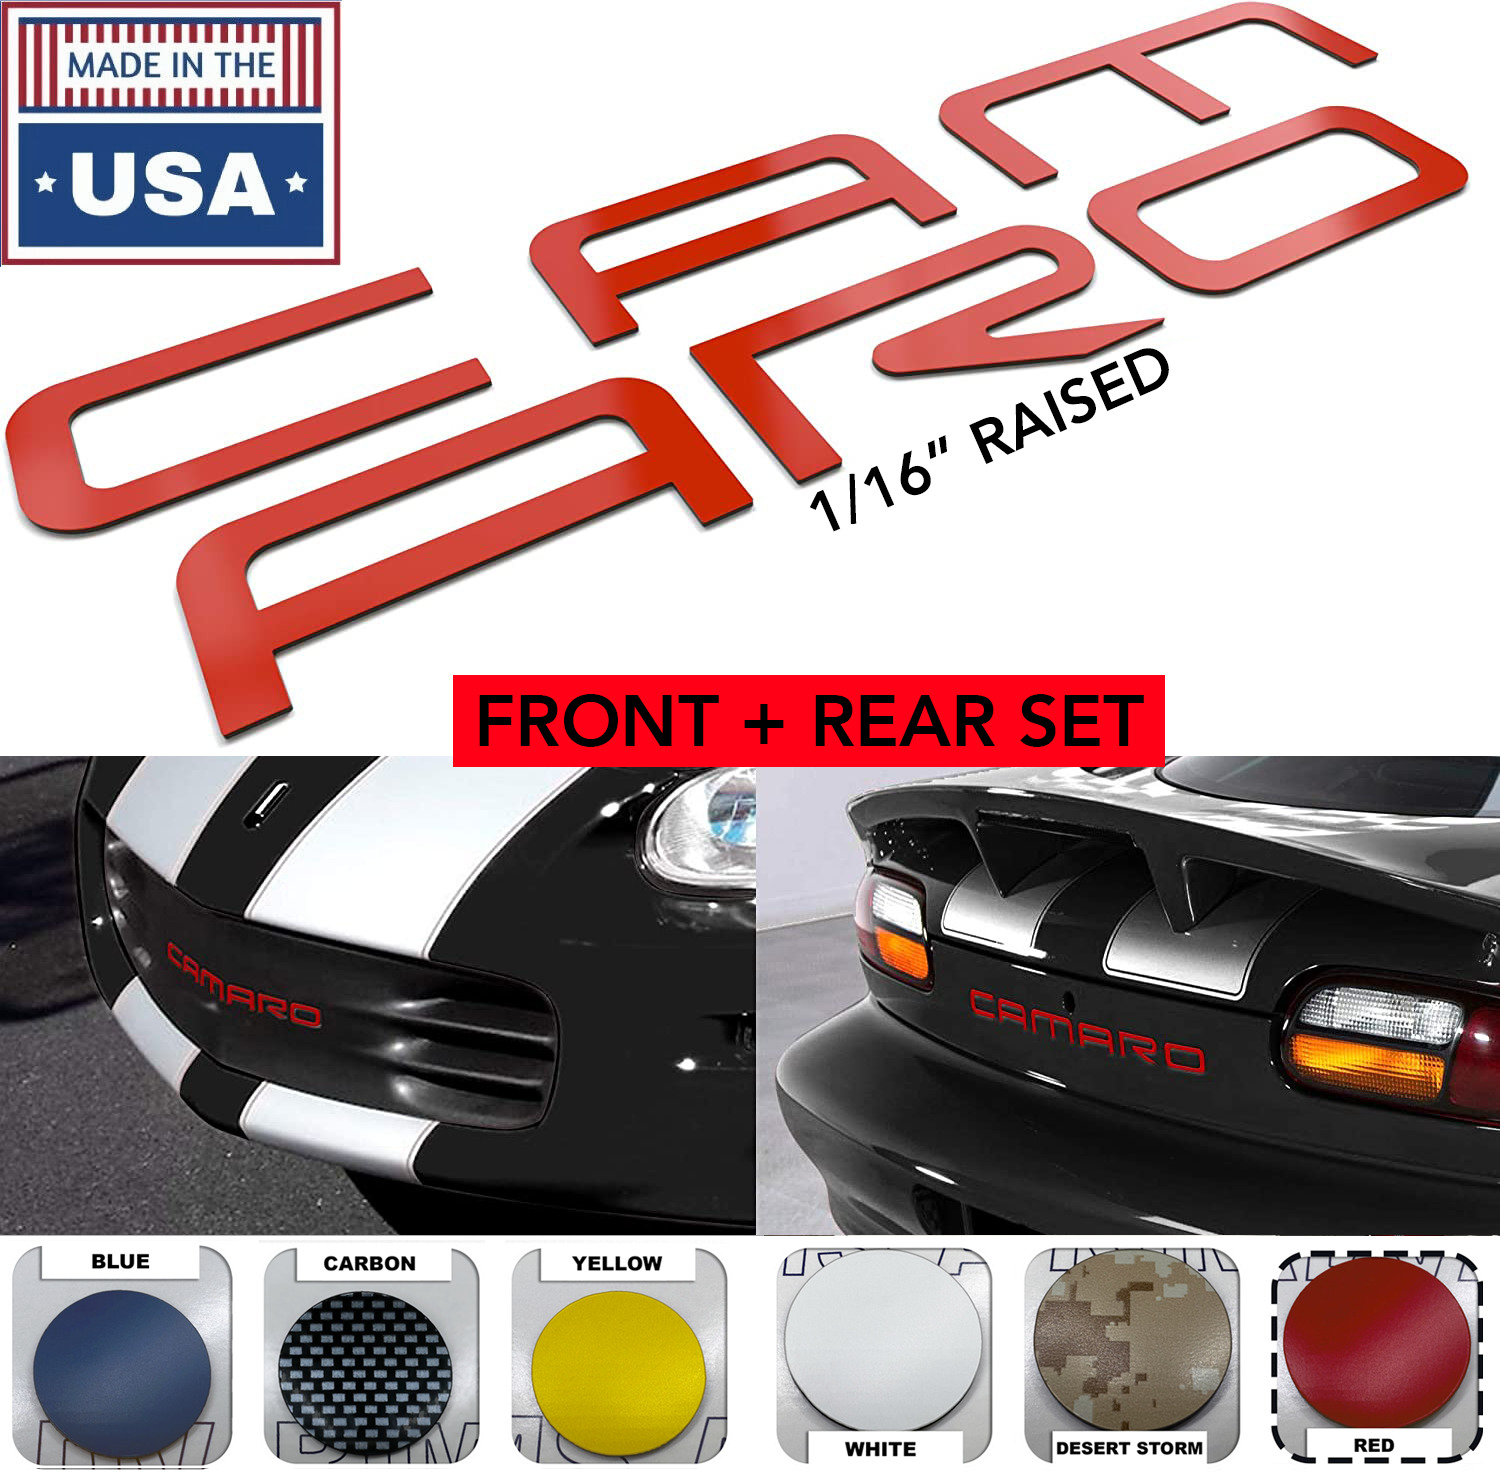 RED FRONT+REAR LETTERS INSERTS FOR CAMARO 1992-2002 NOT DECALS